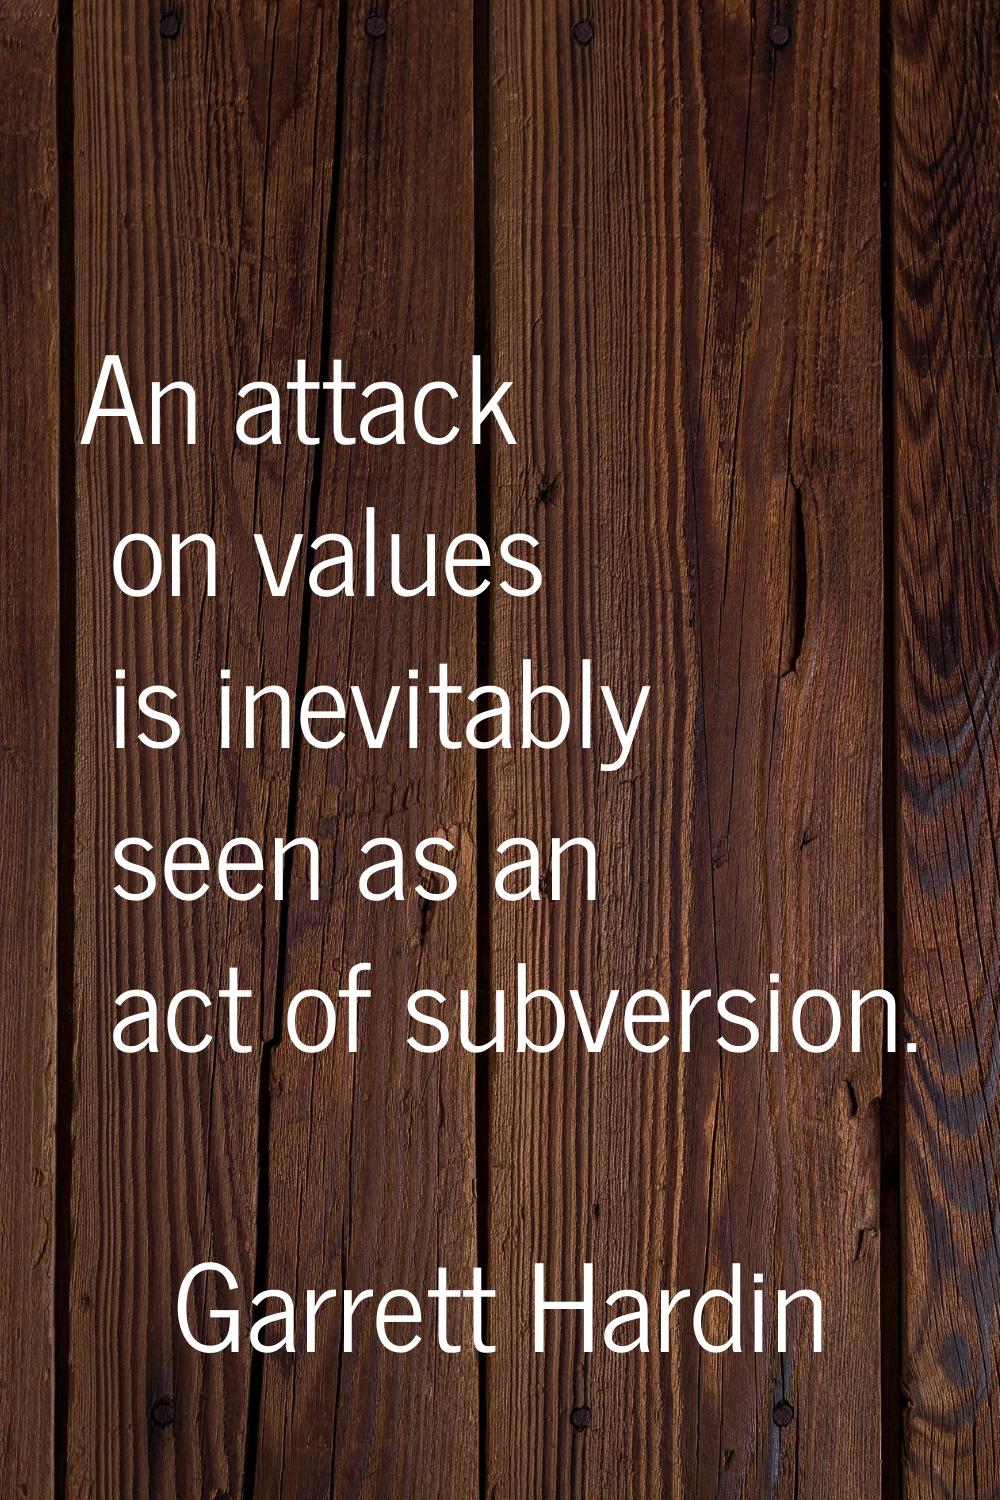 An attack on values is inevitably seen as an act of subversion.